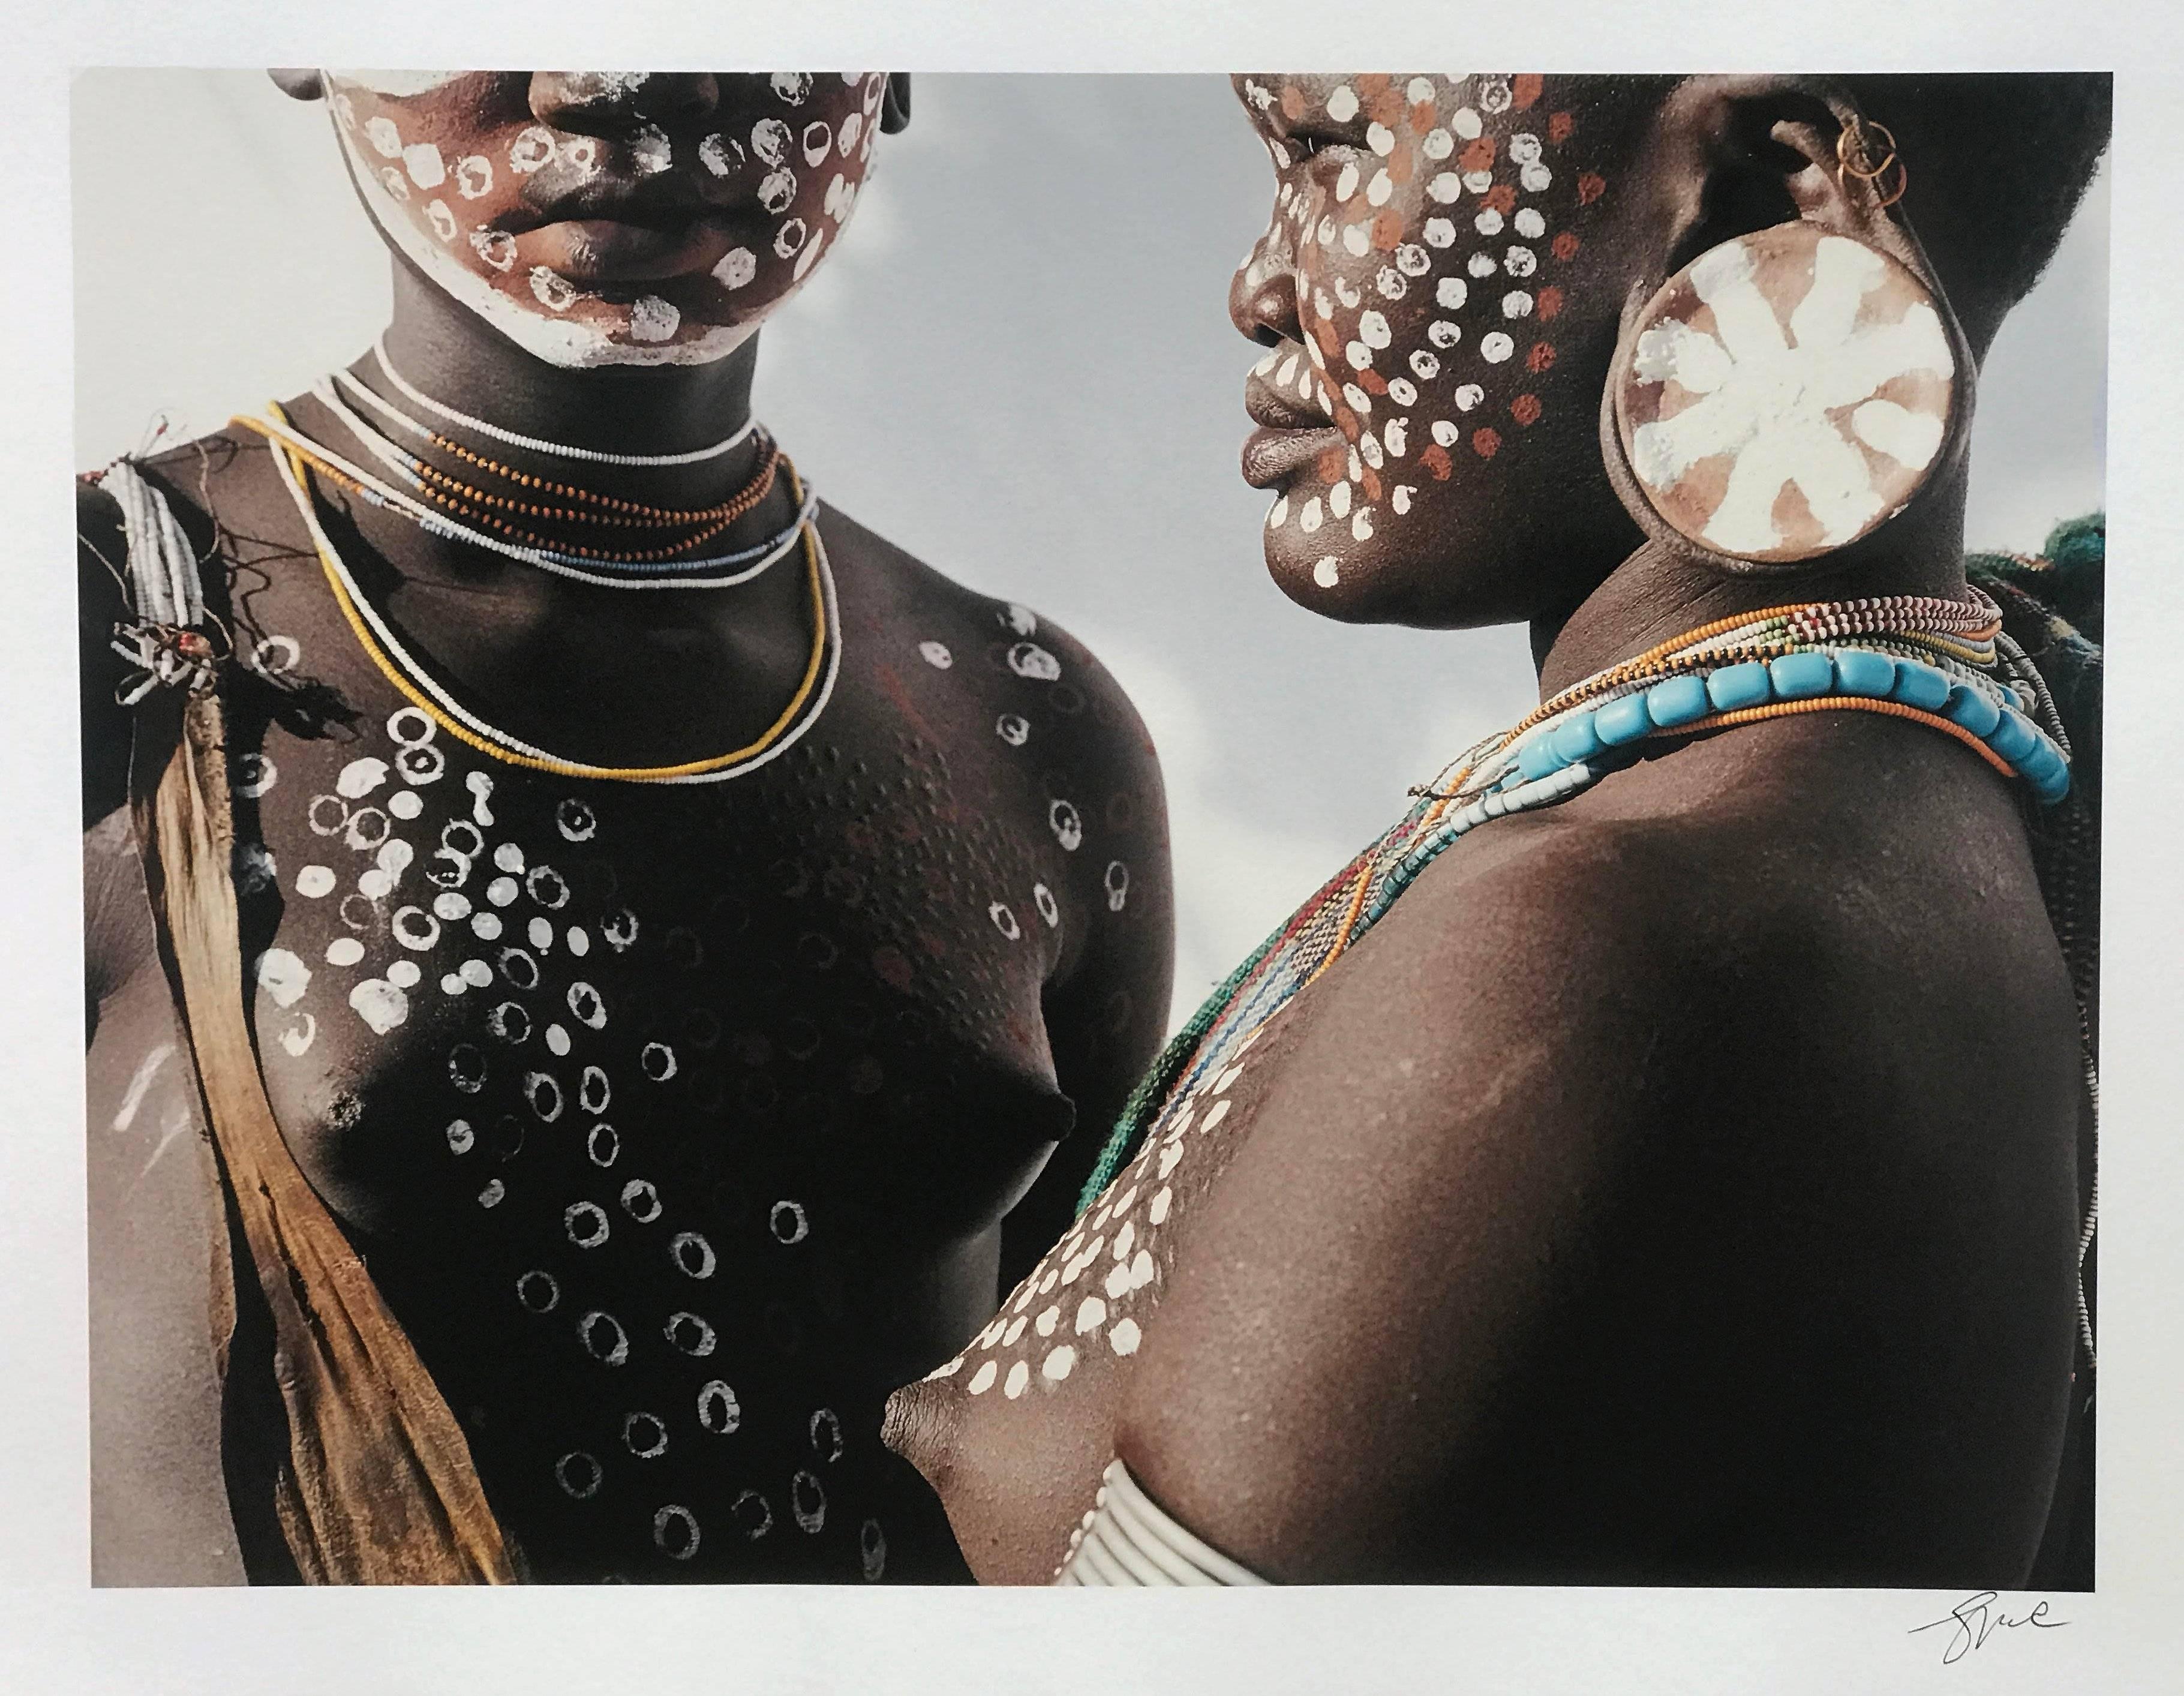 Two Sisters, Omo Valley Ethiopia Africa, Tribal Family Photographic Portrait 